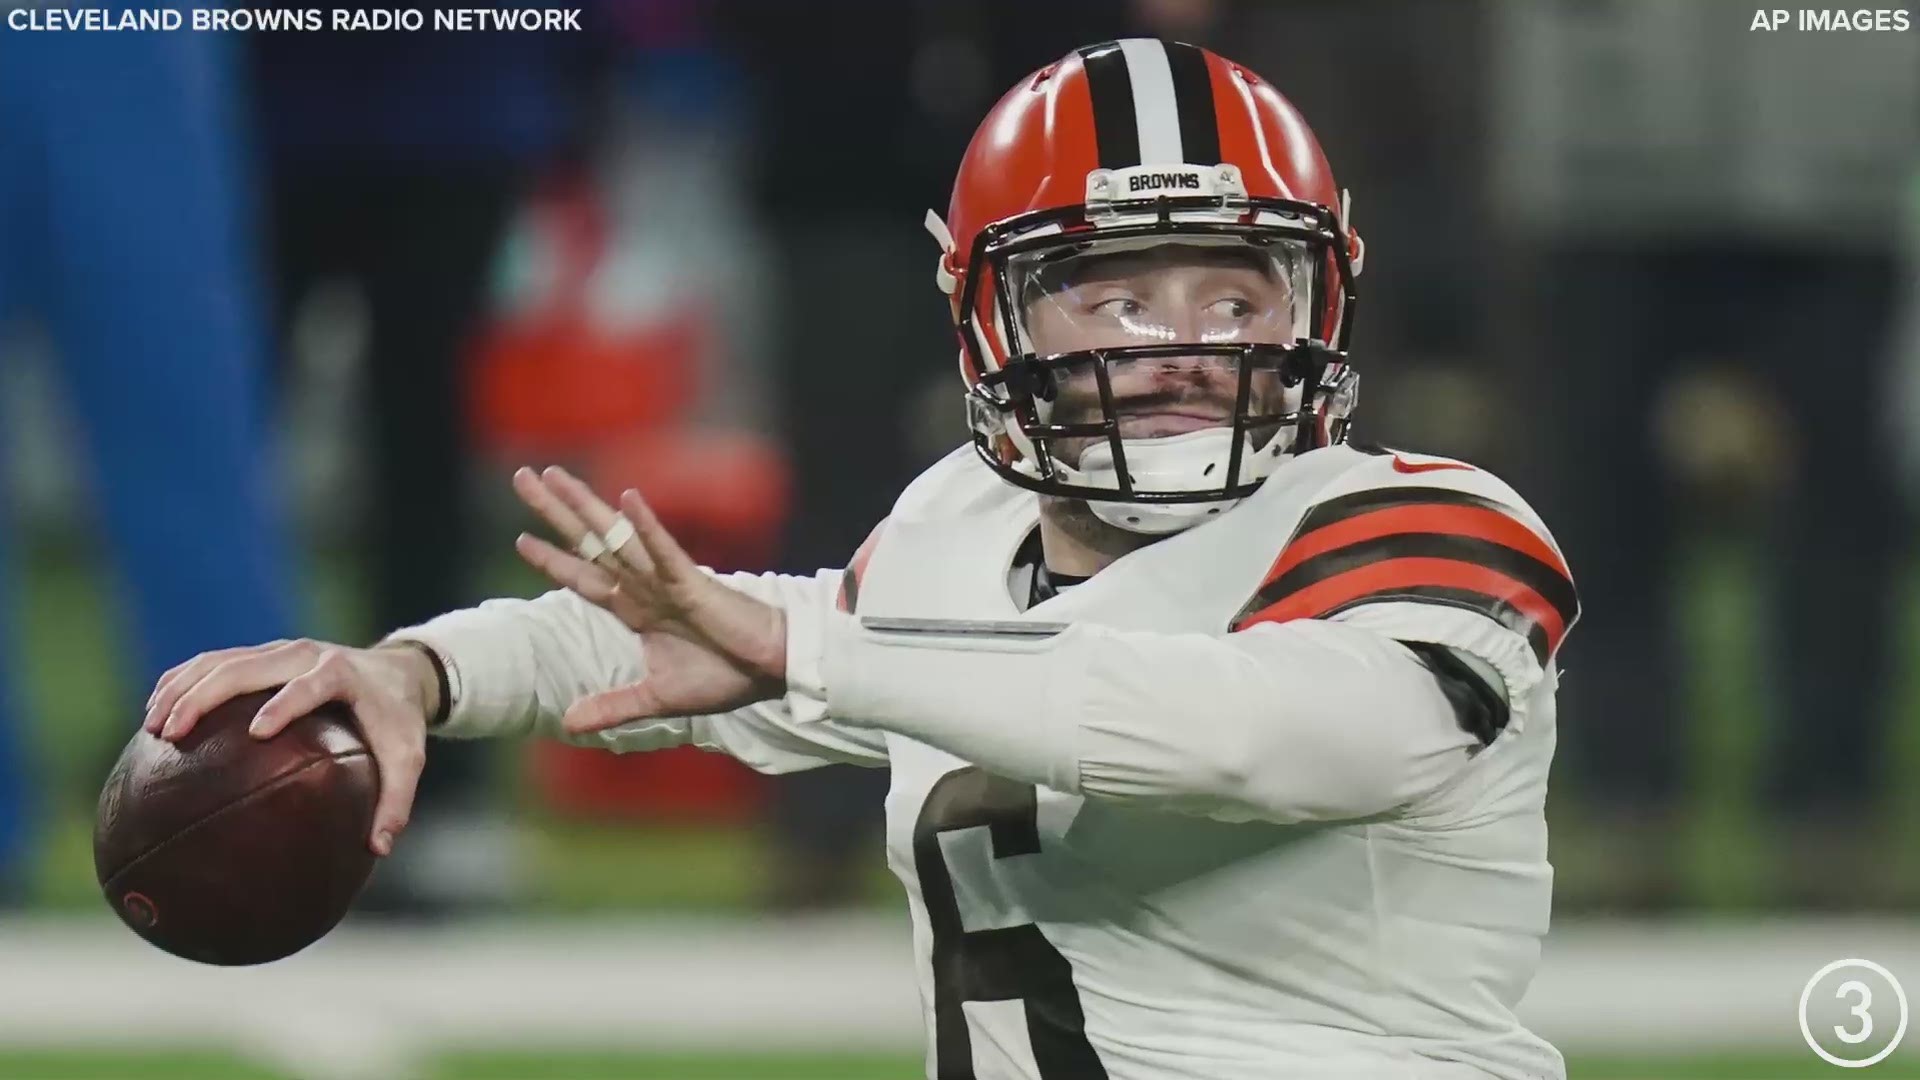 Baker Mayfield's second-quarter touchdown pass to Austin Hooper gave the Cleveland Browns a 7-3 lead over the New York Giants.